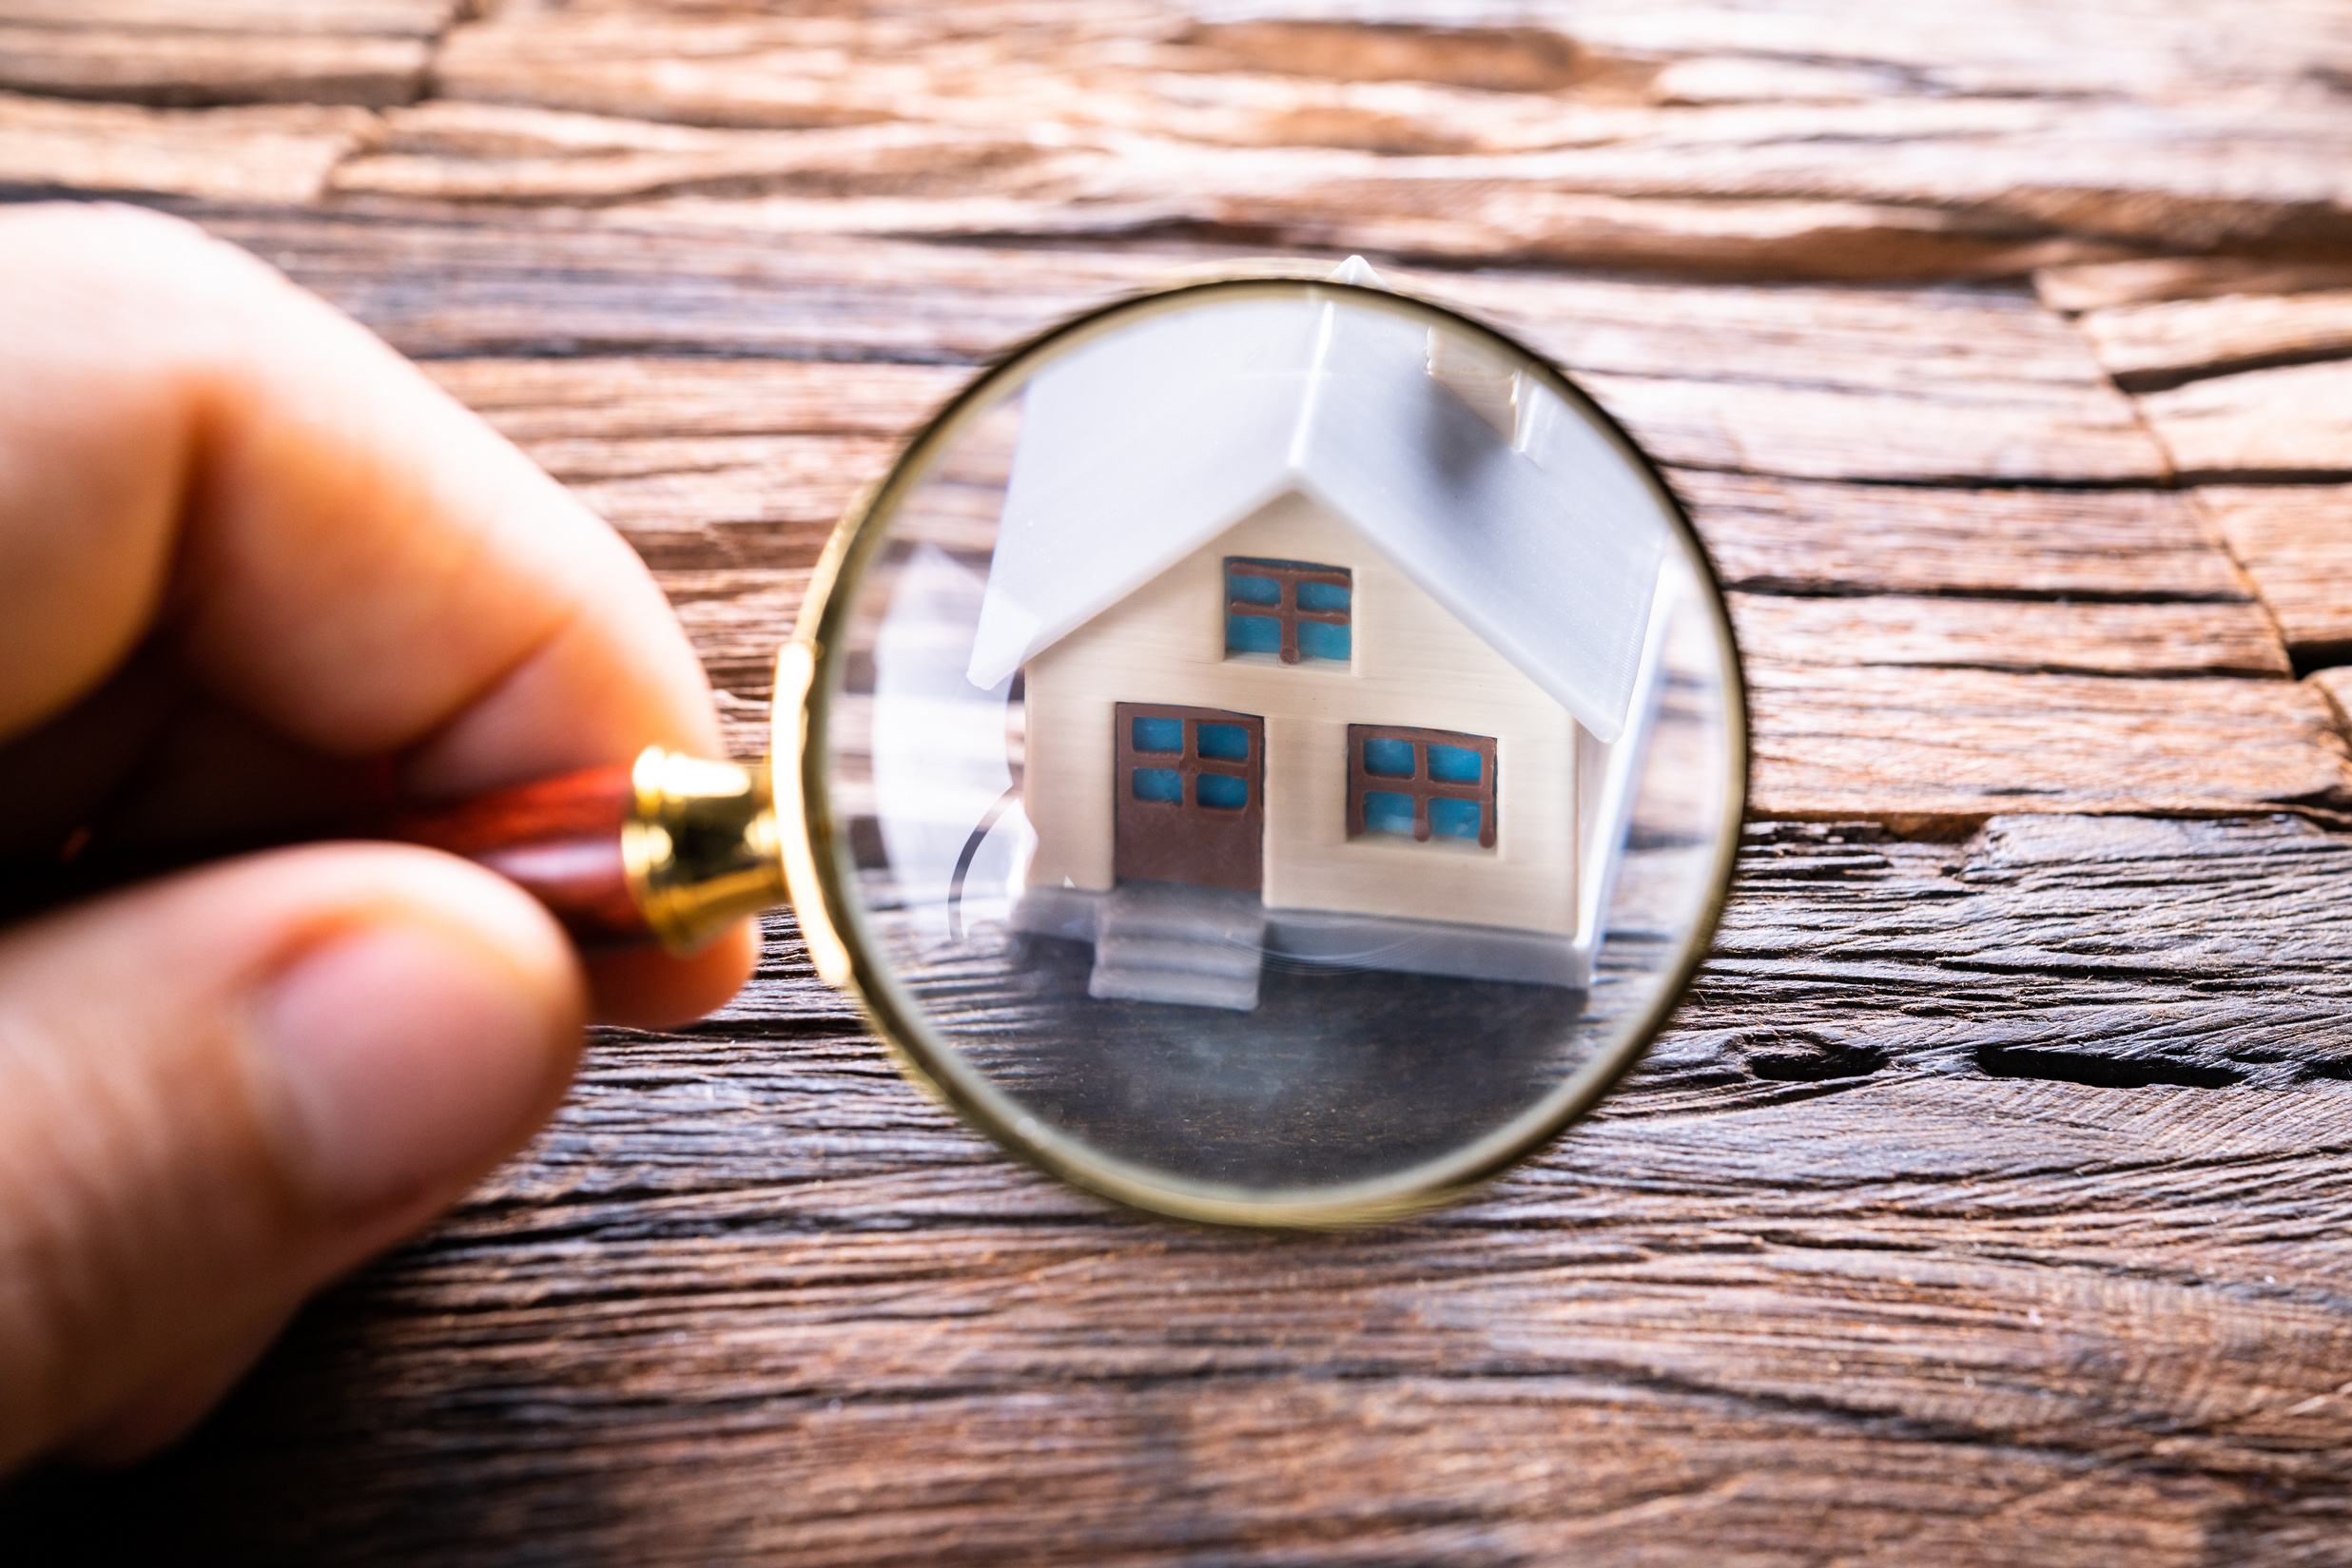 Real Estate House Appraisal And Inspection